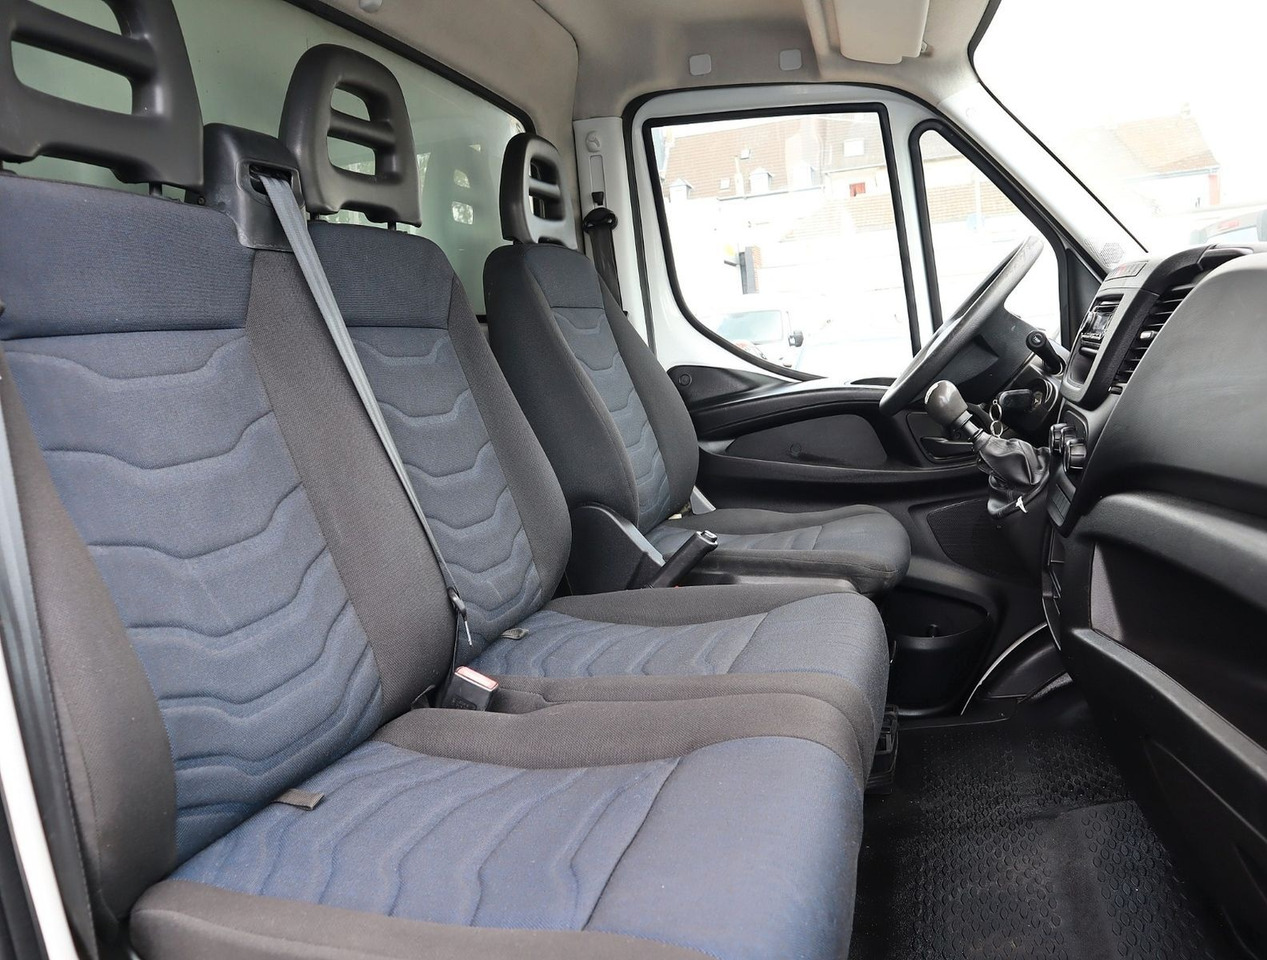 Koffer Transporter IVECO Daily 35S14 Koffer